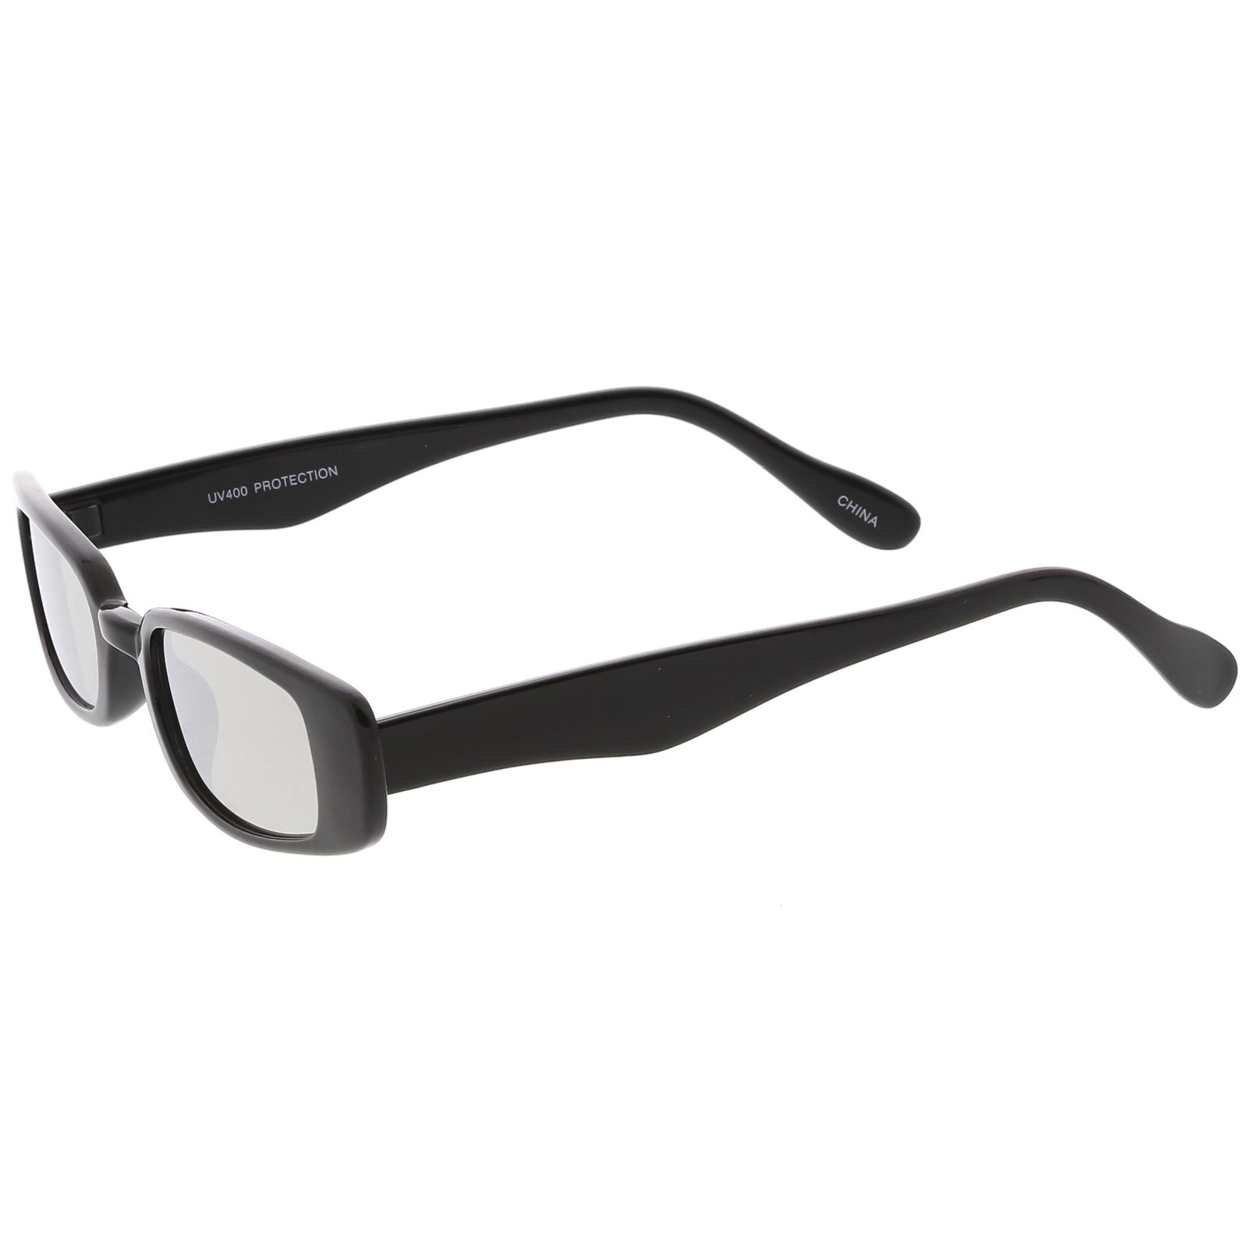 Extreme Thin Small Rectangle Sunglasses Mirrored Lens 49mm - White / Magenta Mirror